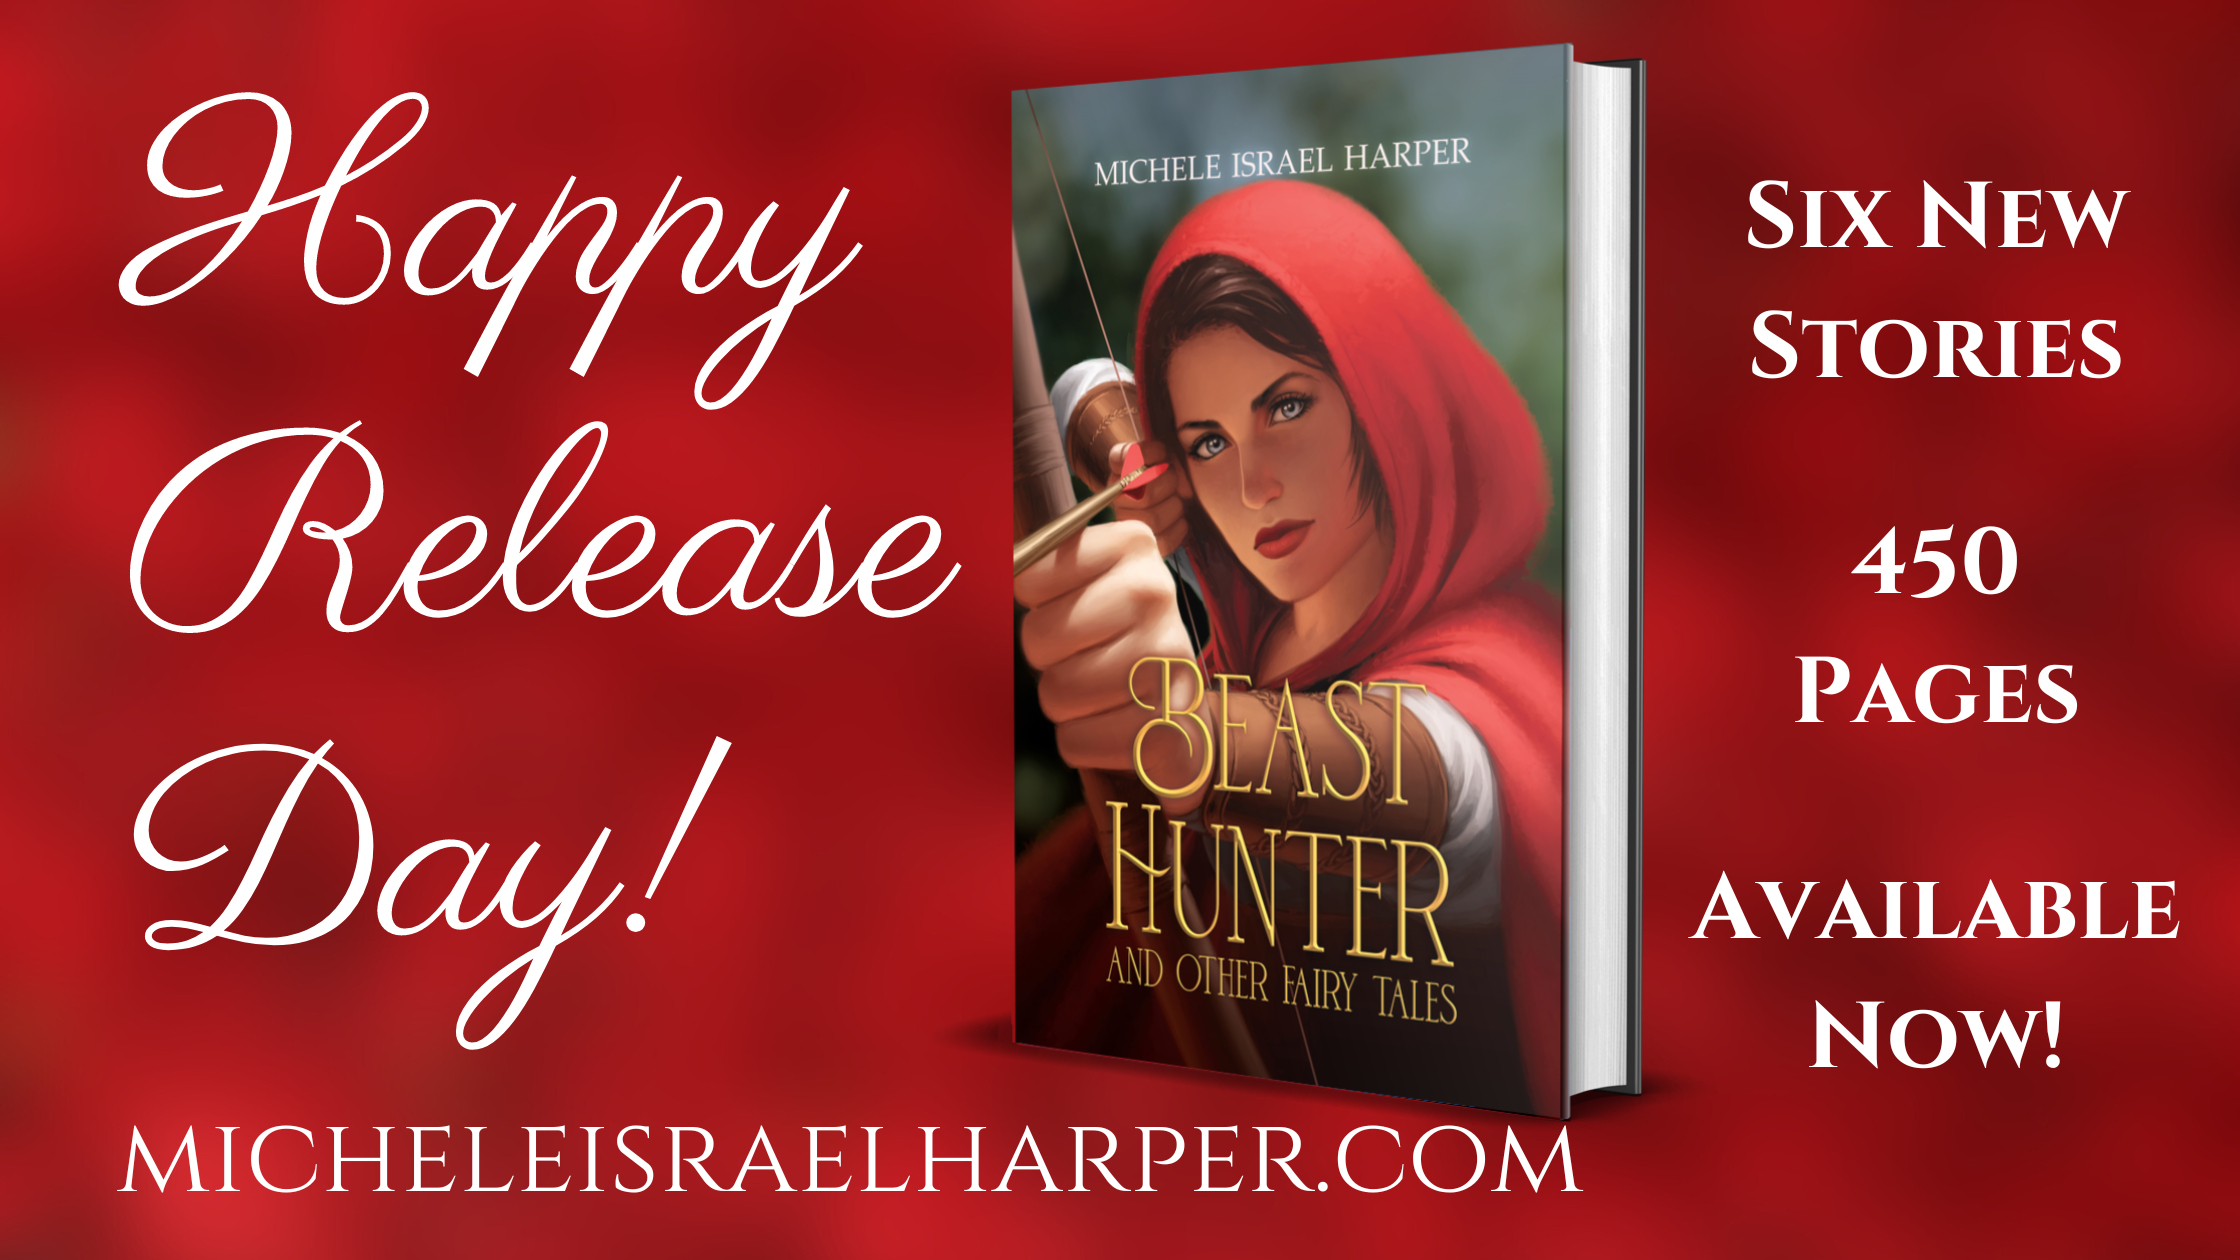 Beast Hunter and Other Fairy Tales Release Day!